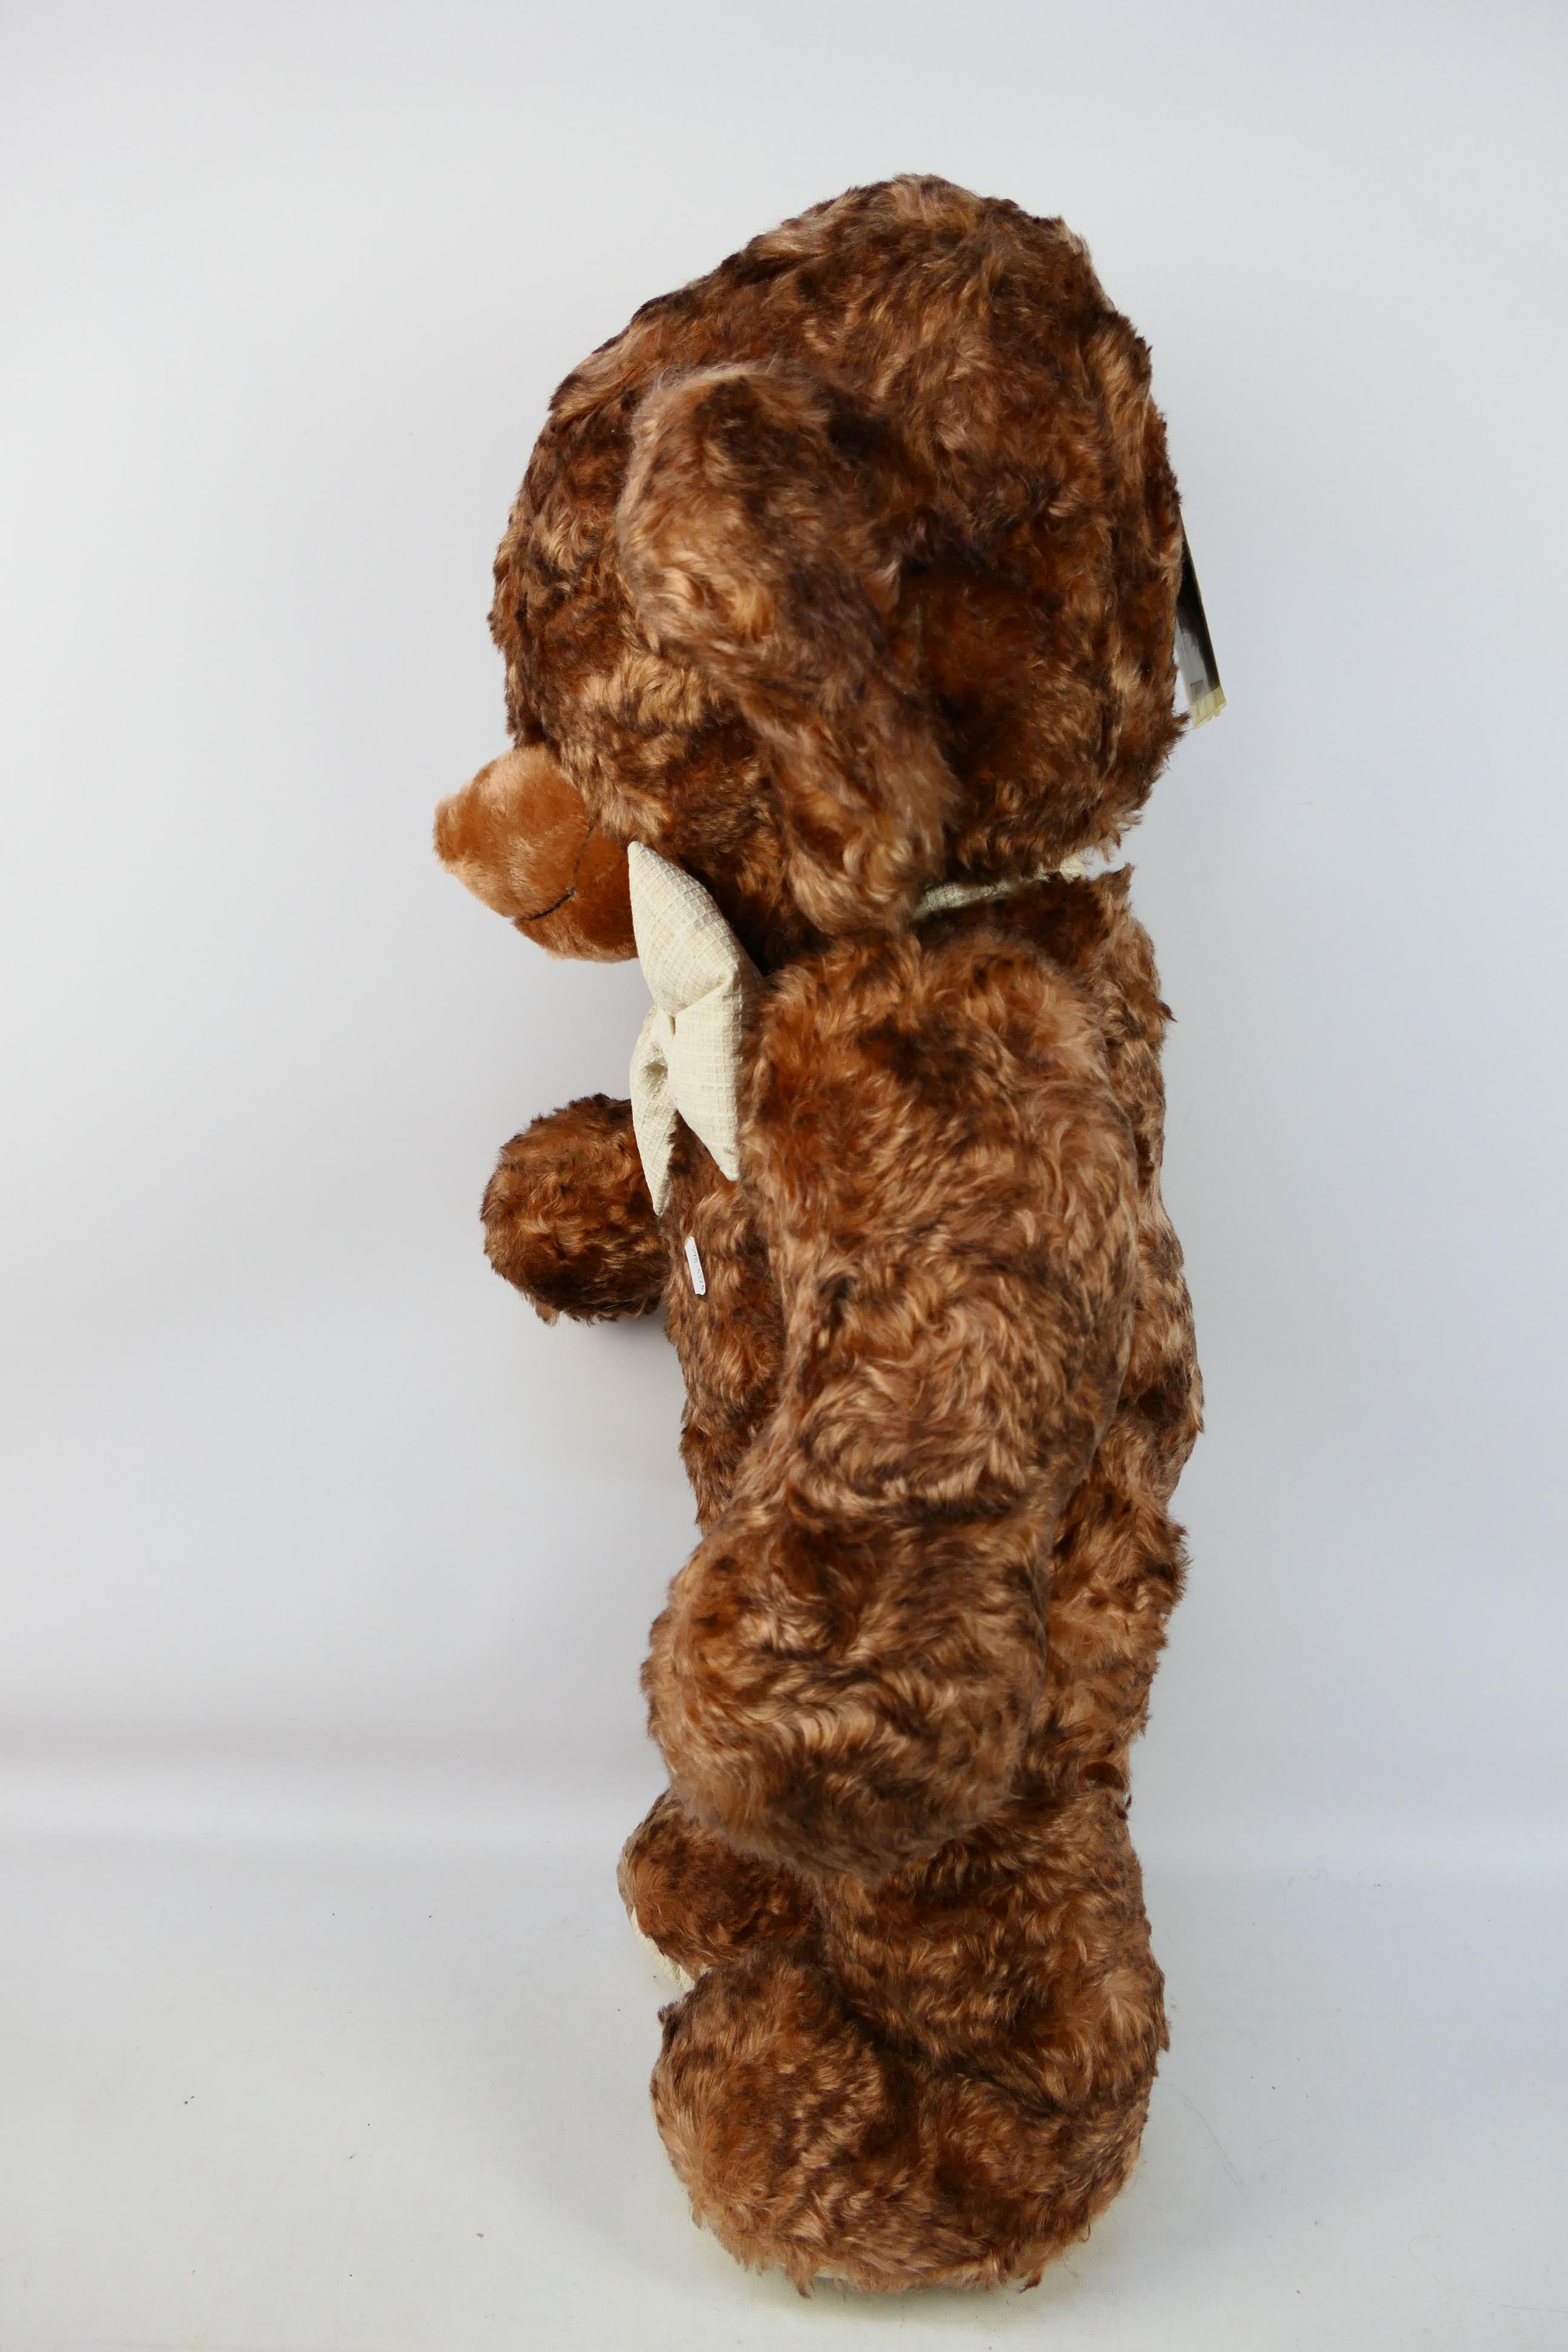 Merrythought - A large Merrythought jointed 'Millenium' teddy bear. - Image 3 of 7